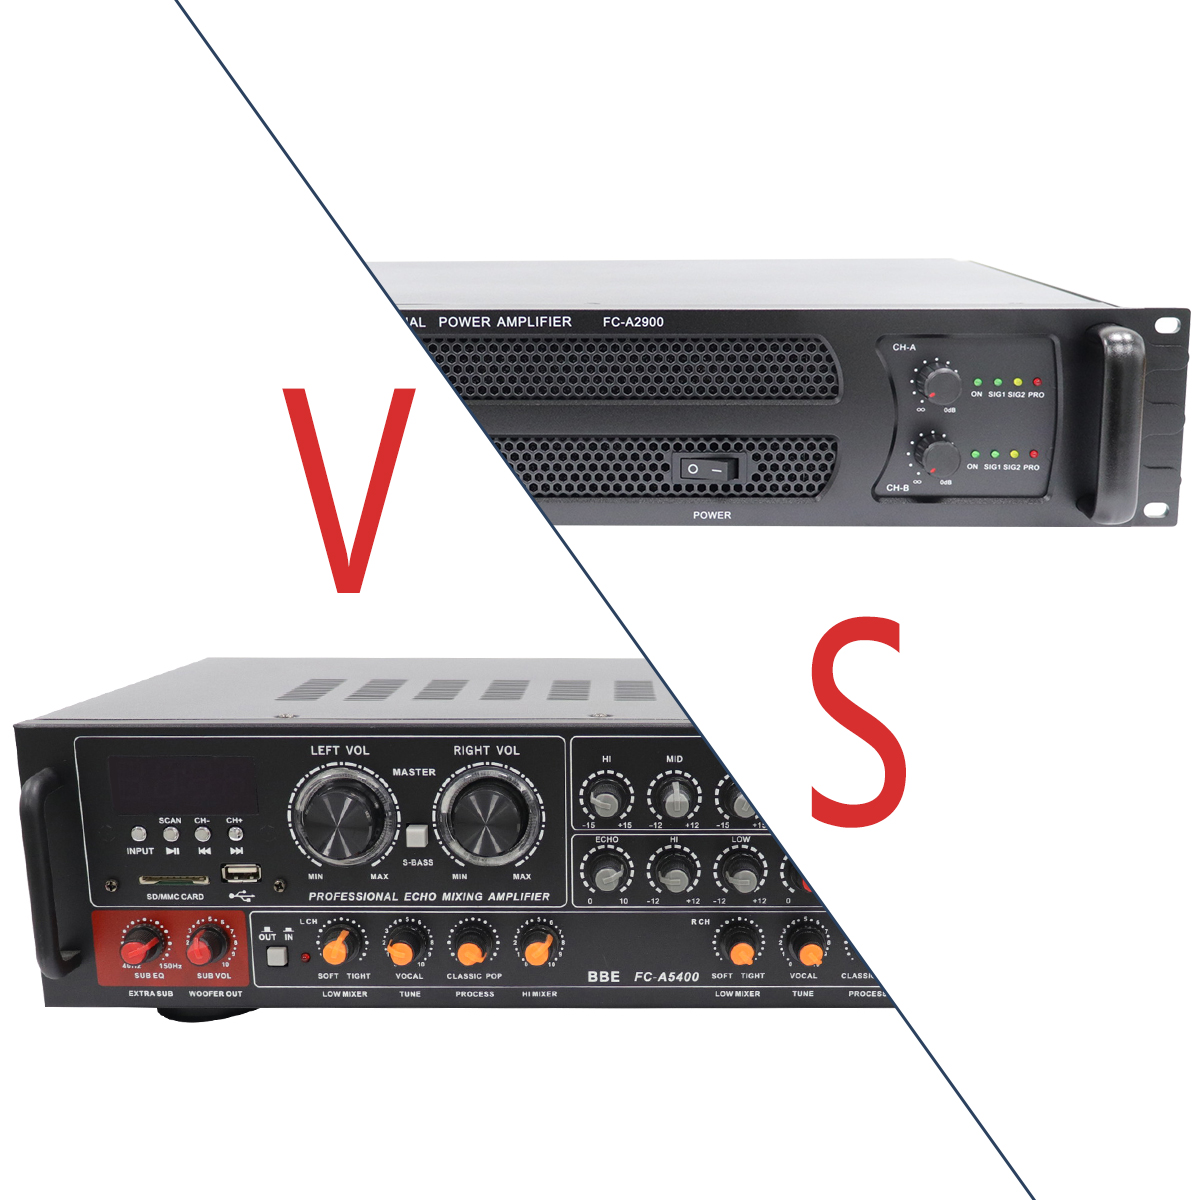 What is the difference between a combined amplifier and a split amplifier?